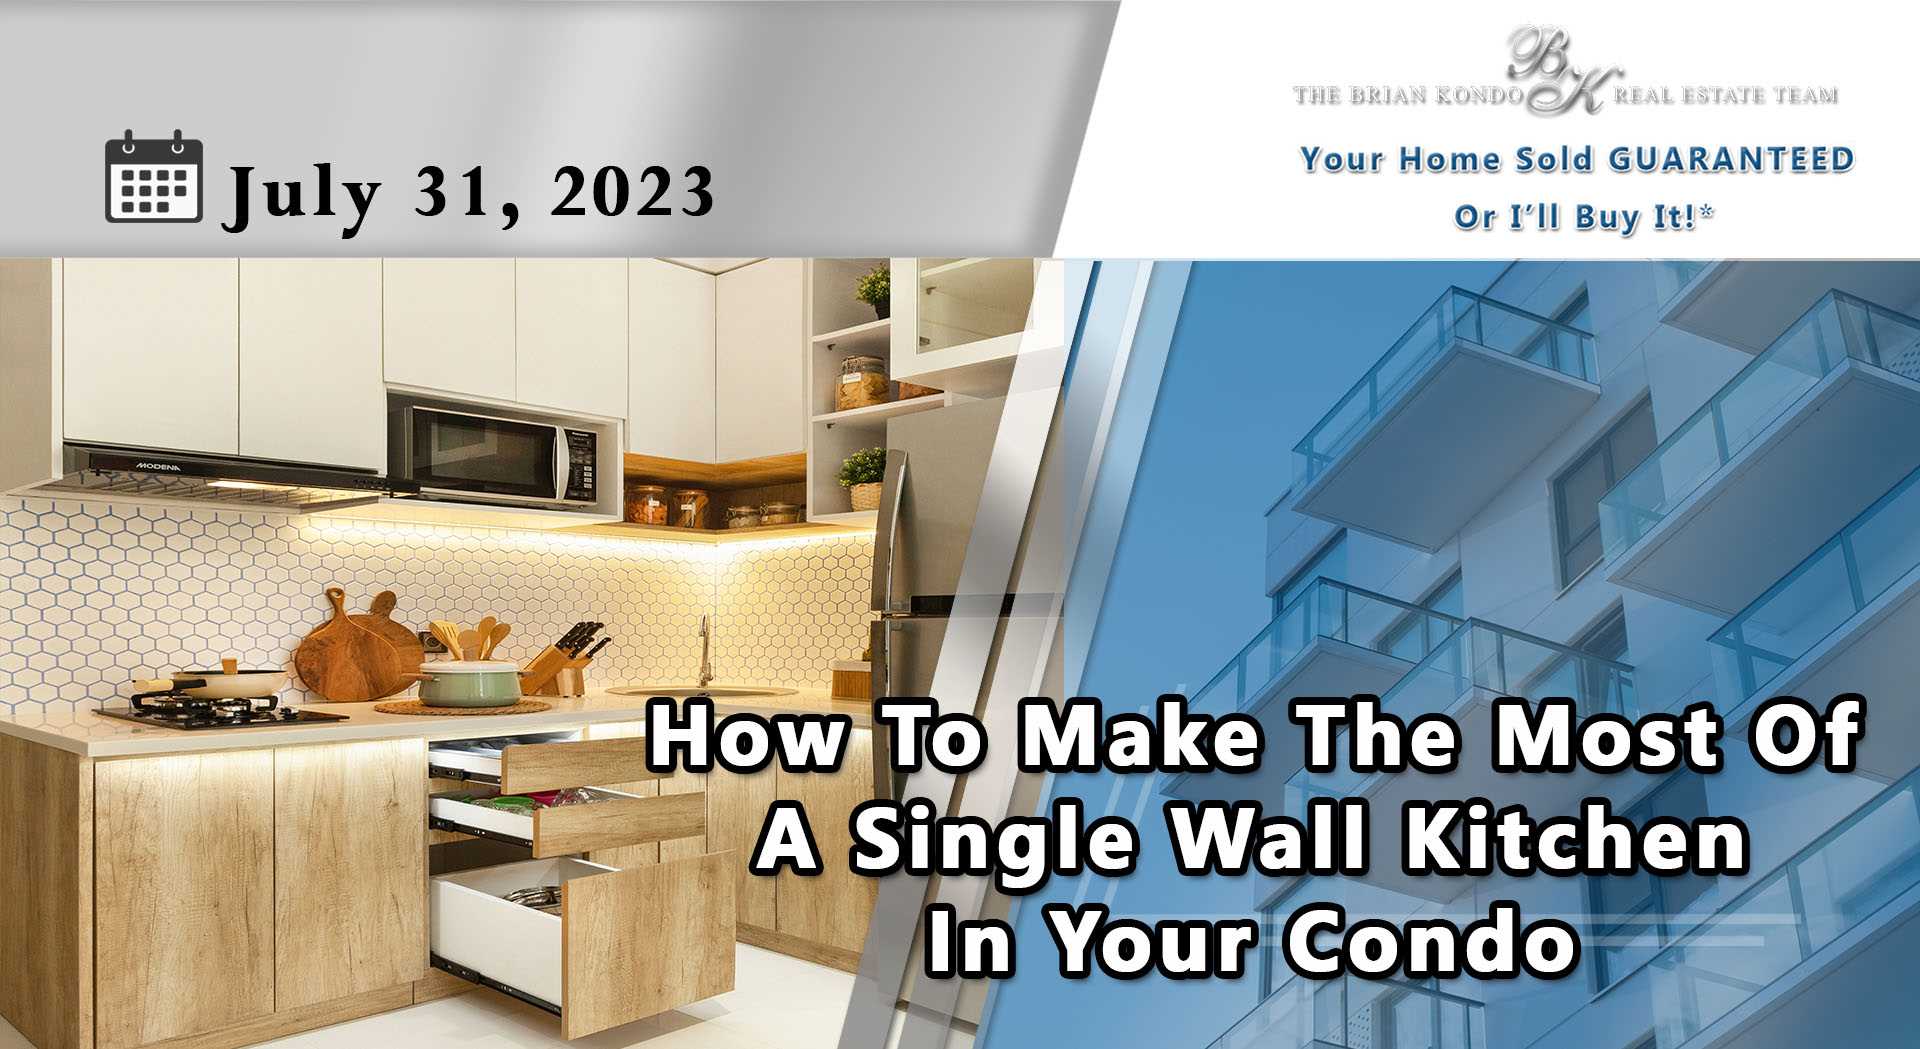 How To Make The Most Of A Single Wall Kitchen In Your Condo